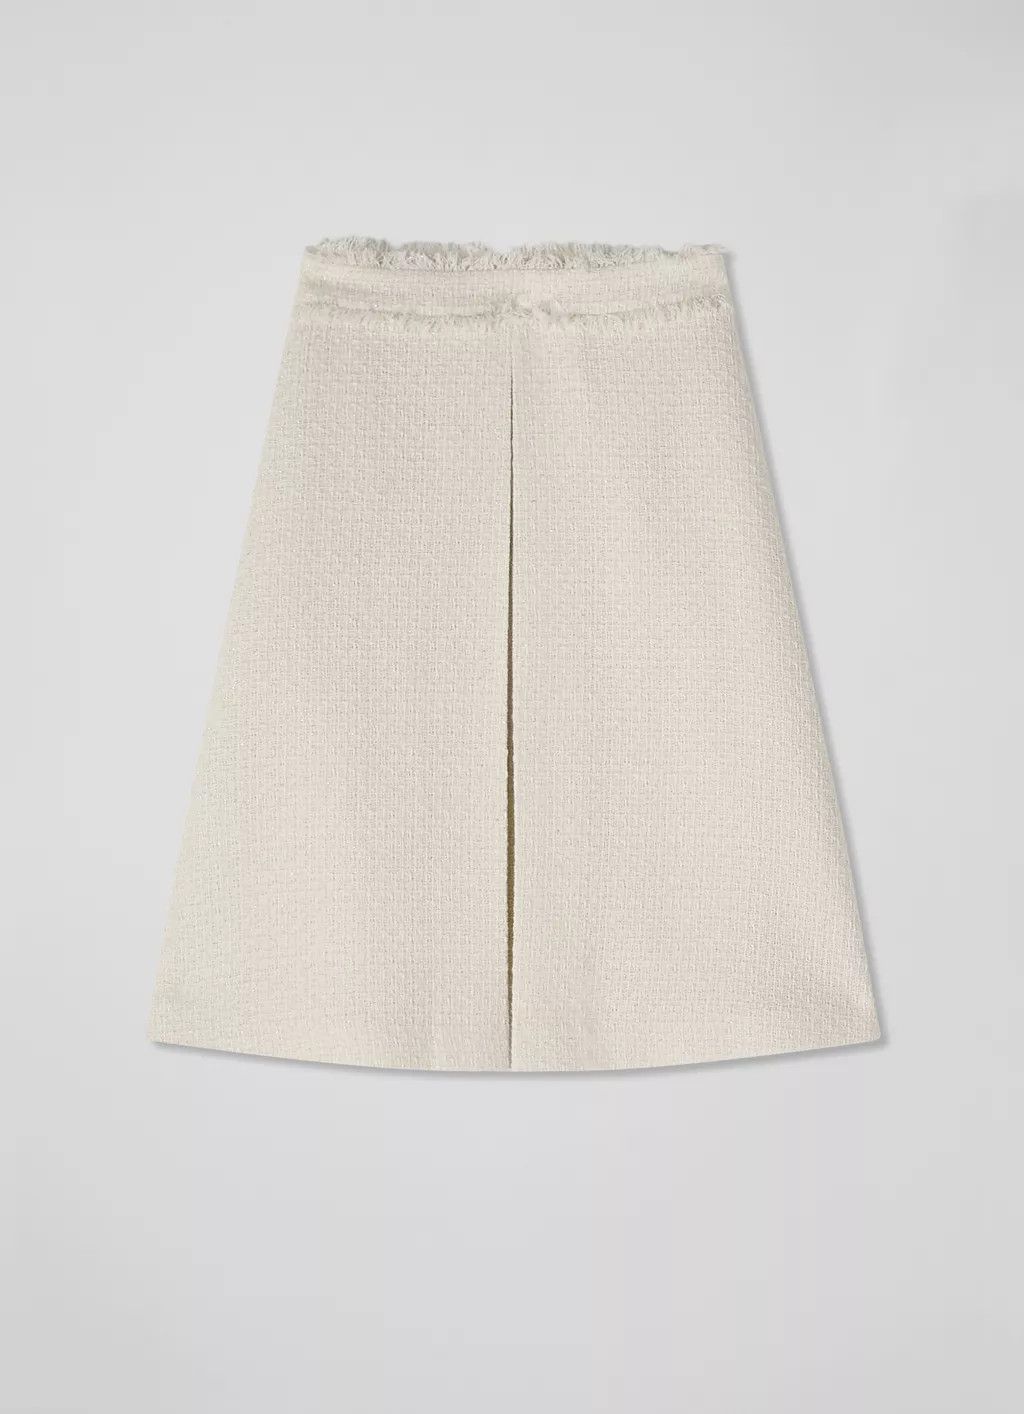 Ada Cream and Silver Recycled Cotton Tweed Skirt | L.K. Bennett (UK)